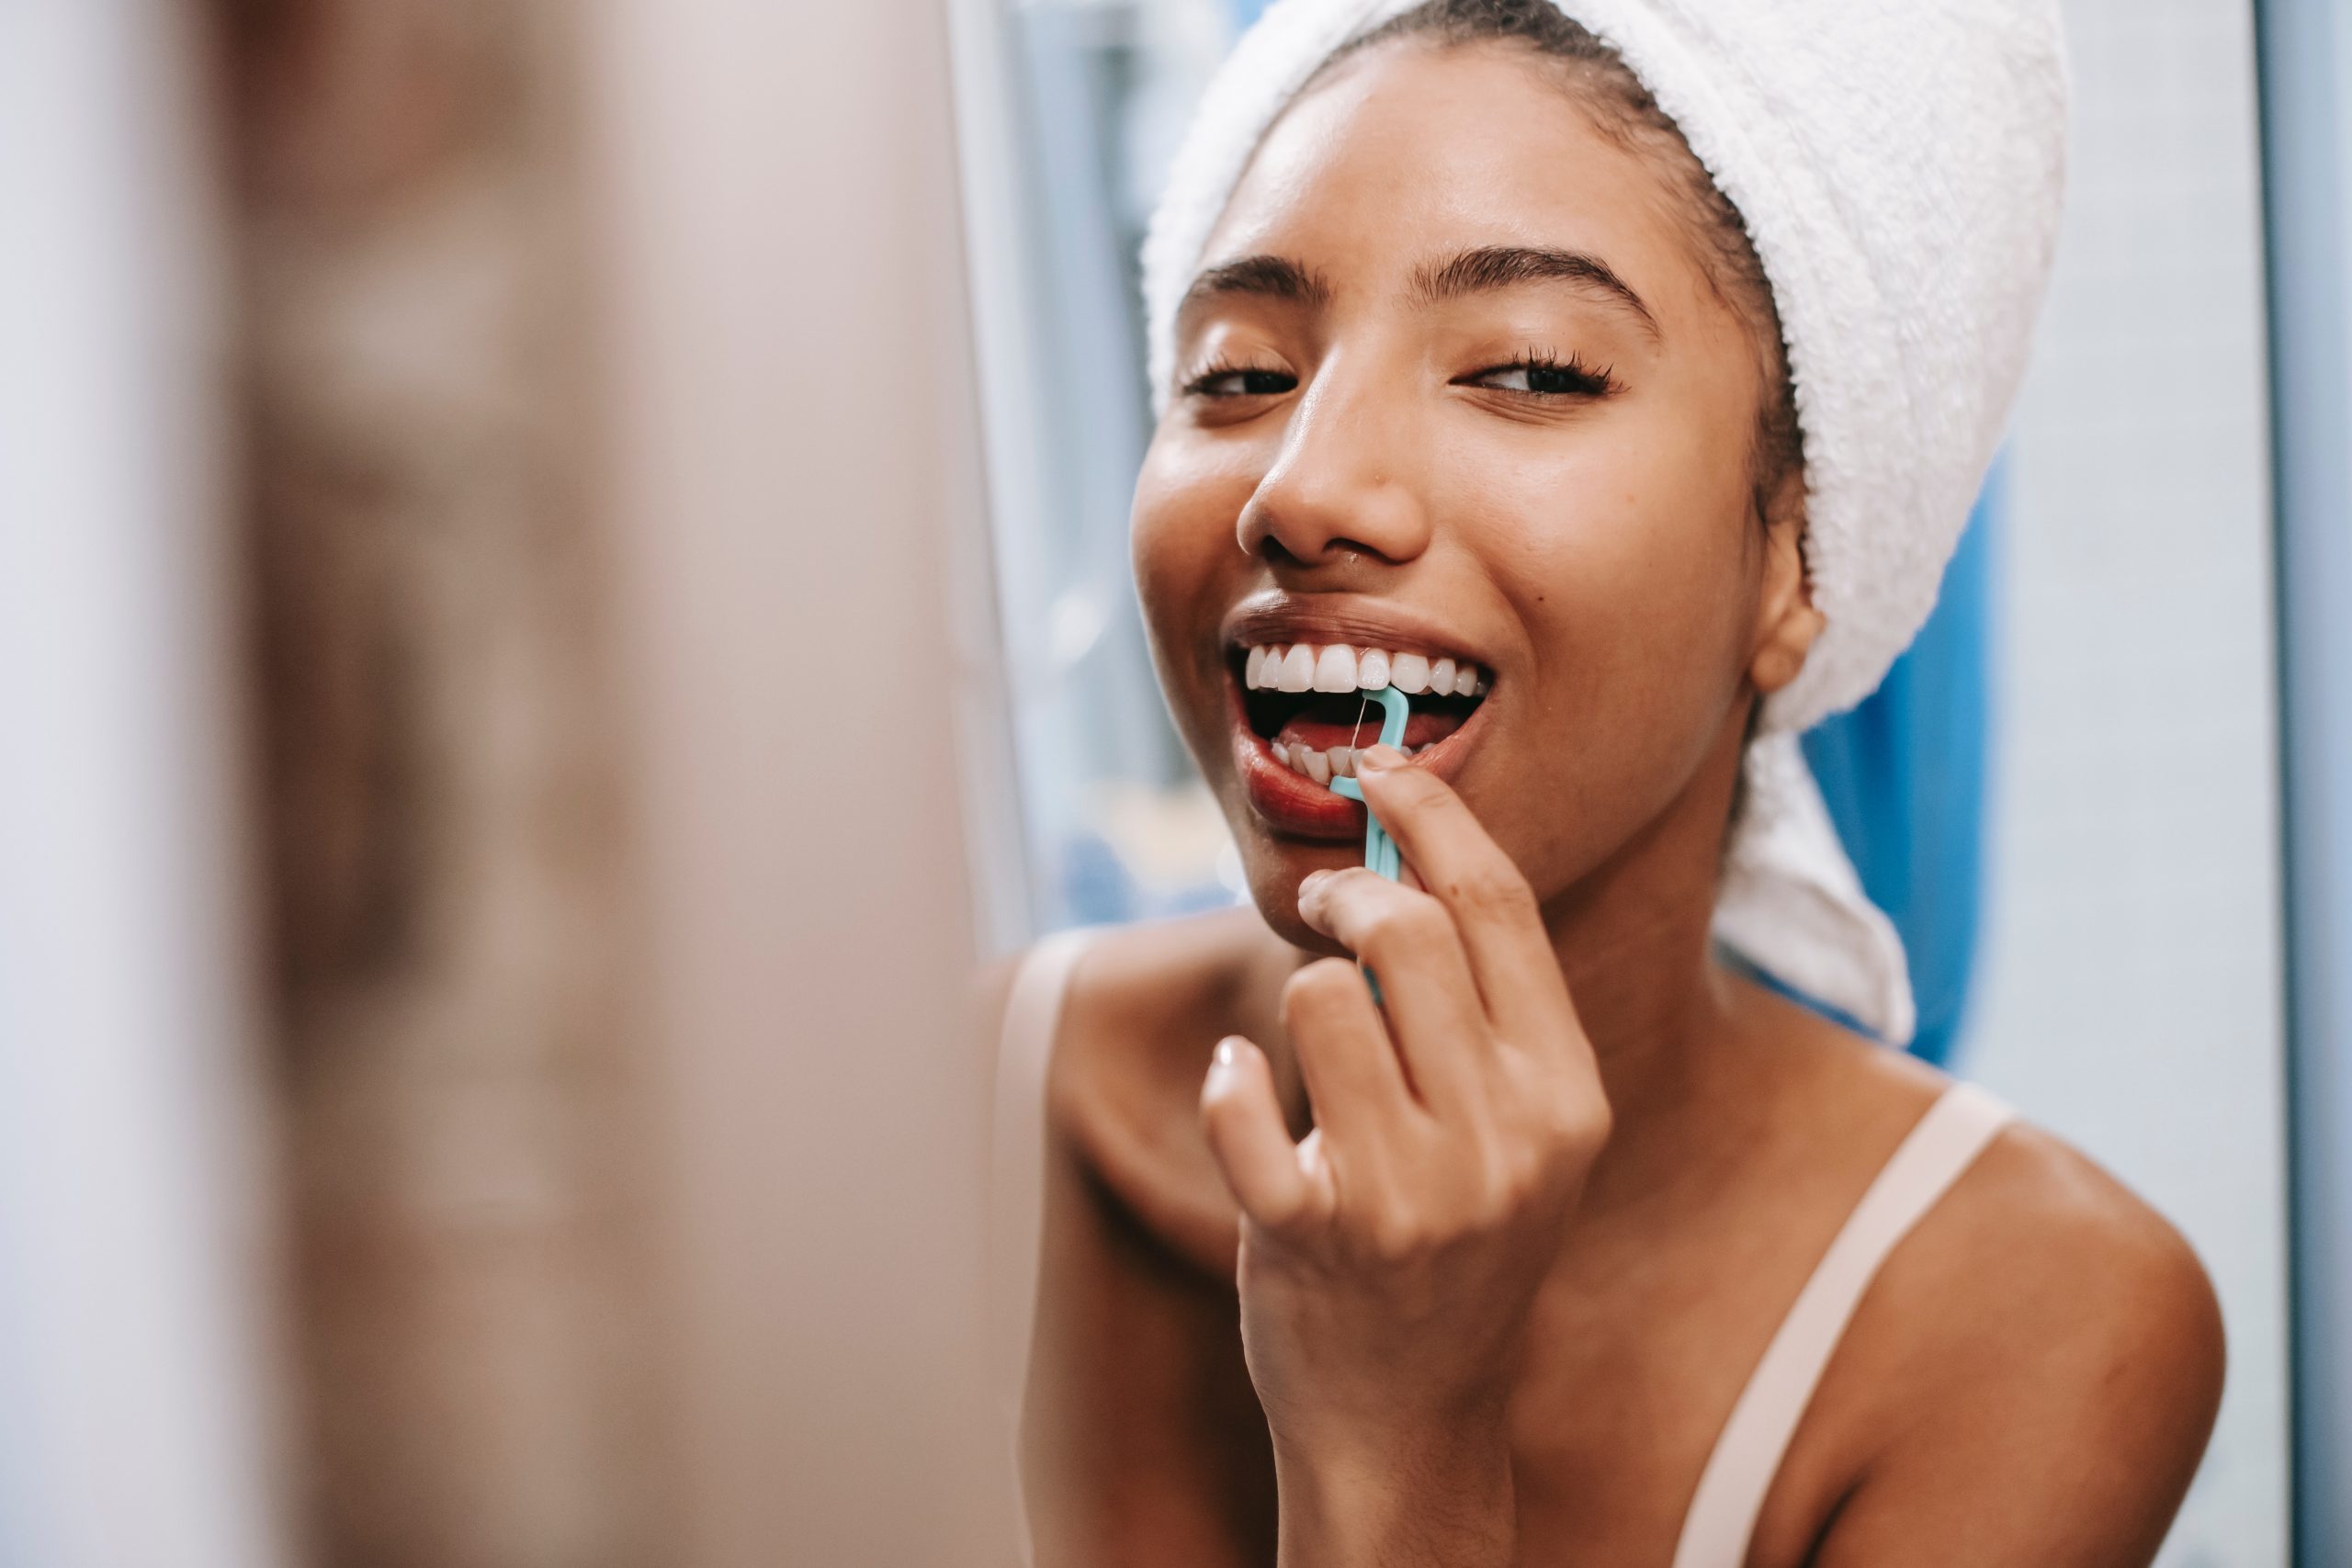 Why Flossing is Important and Why People Don’t Do It, According to Dentists